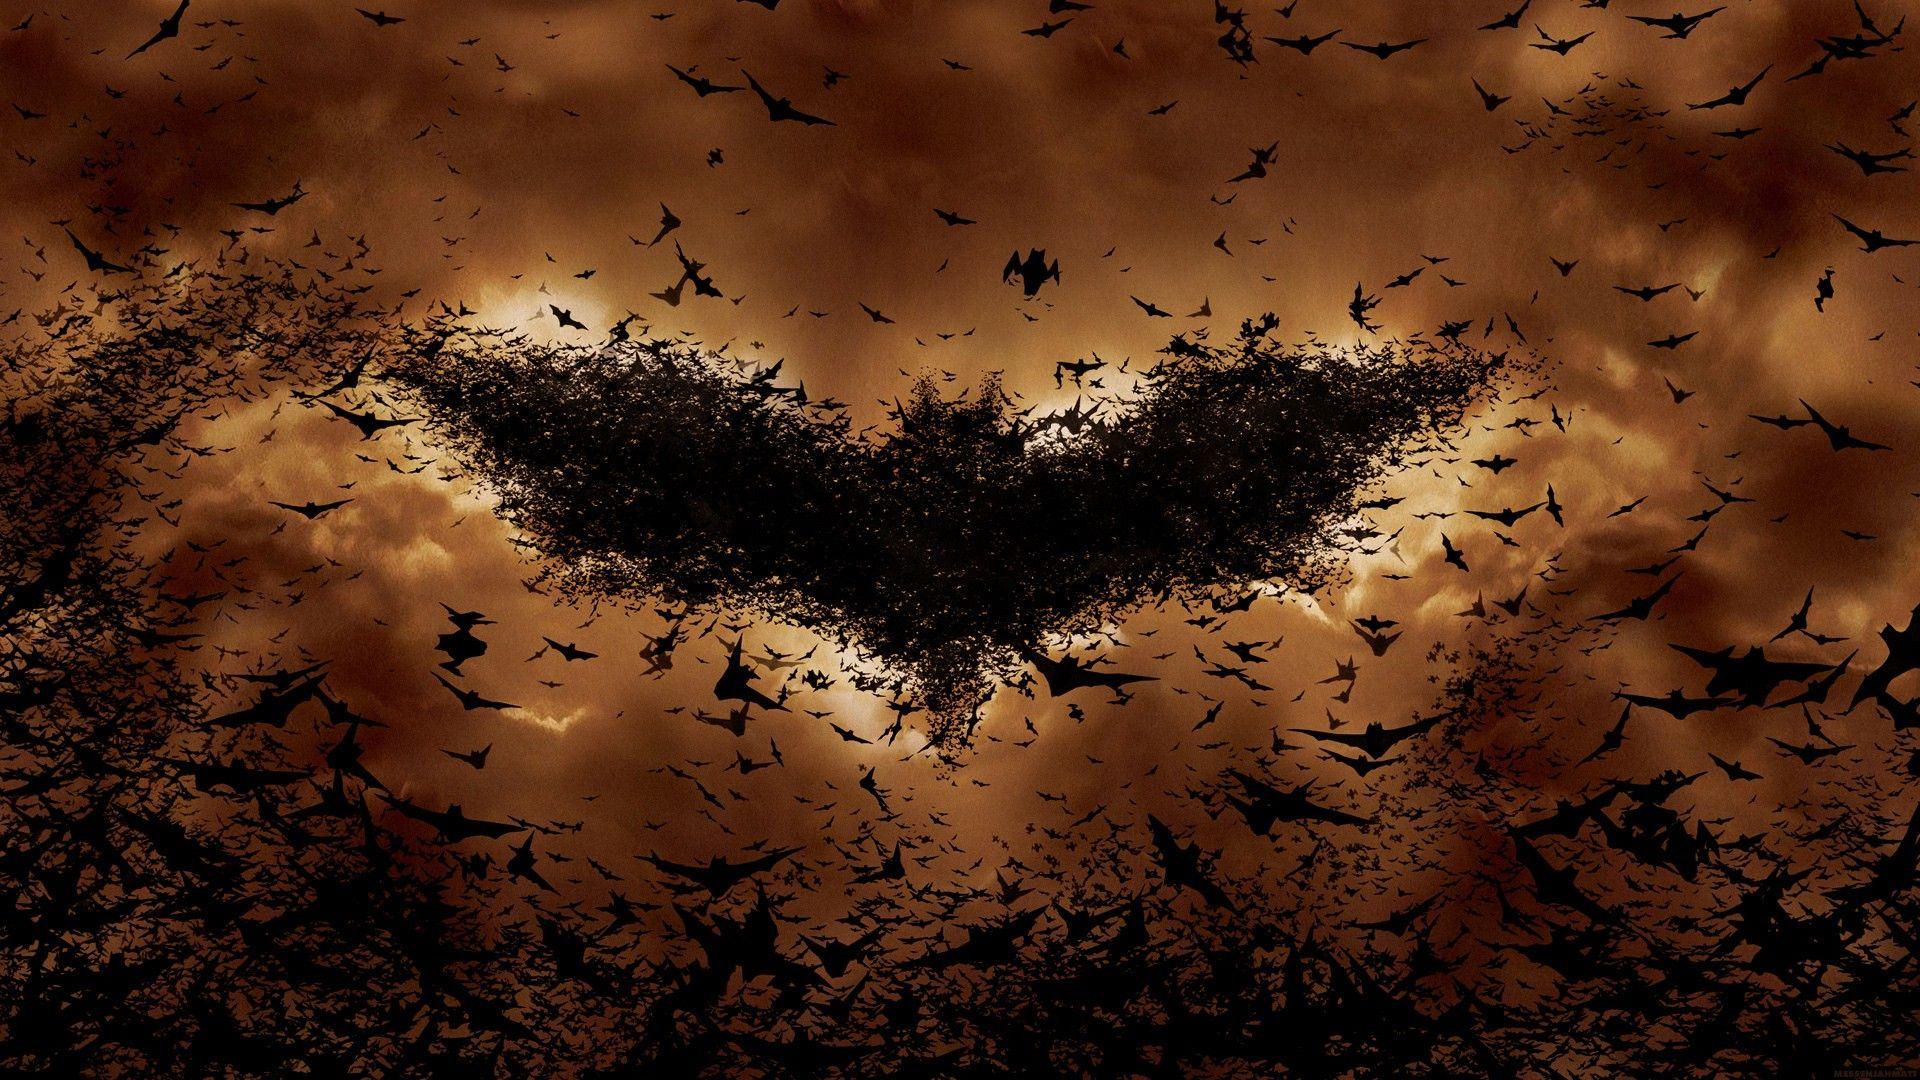 Bat Wallpaper for PC. Full HD Picture